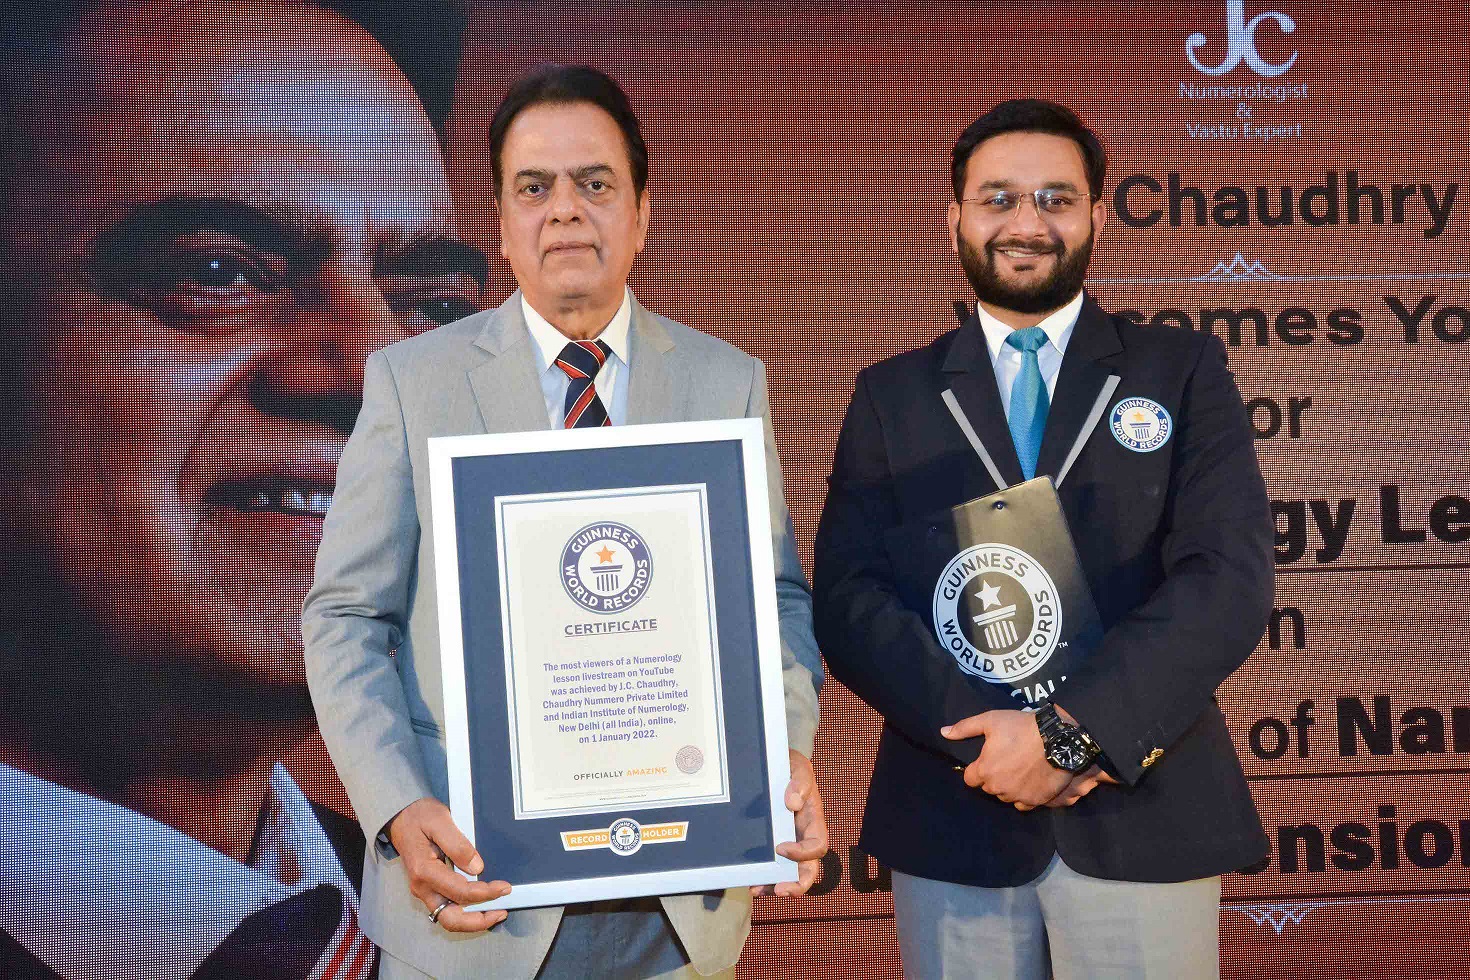 renowned-numerologist-mr-j-c-chaudhry-conferred-with-guinness-world-record-2022-for-the-most-viewers-of-a-live-session-on-numerology